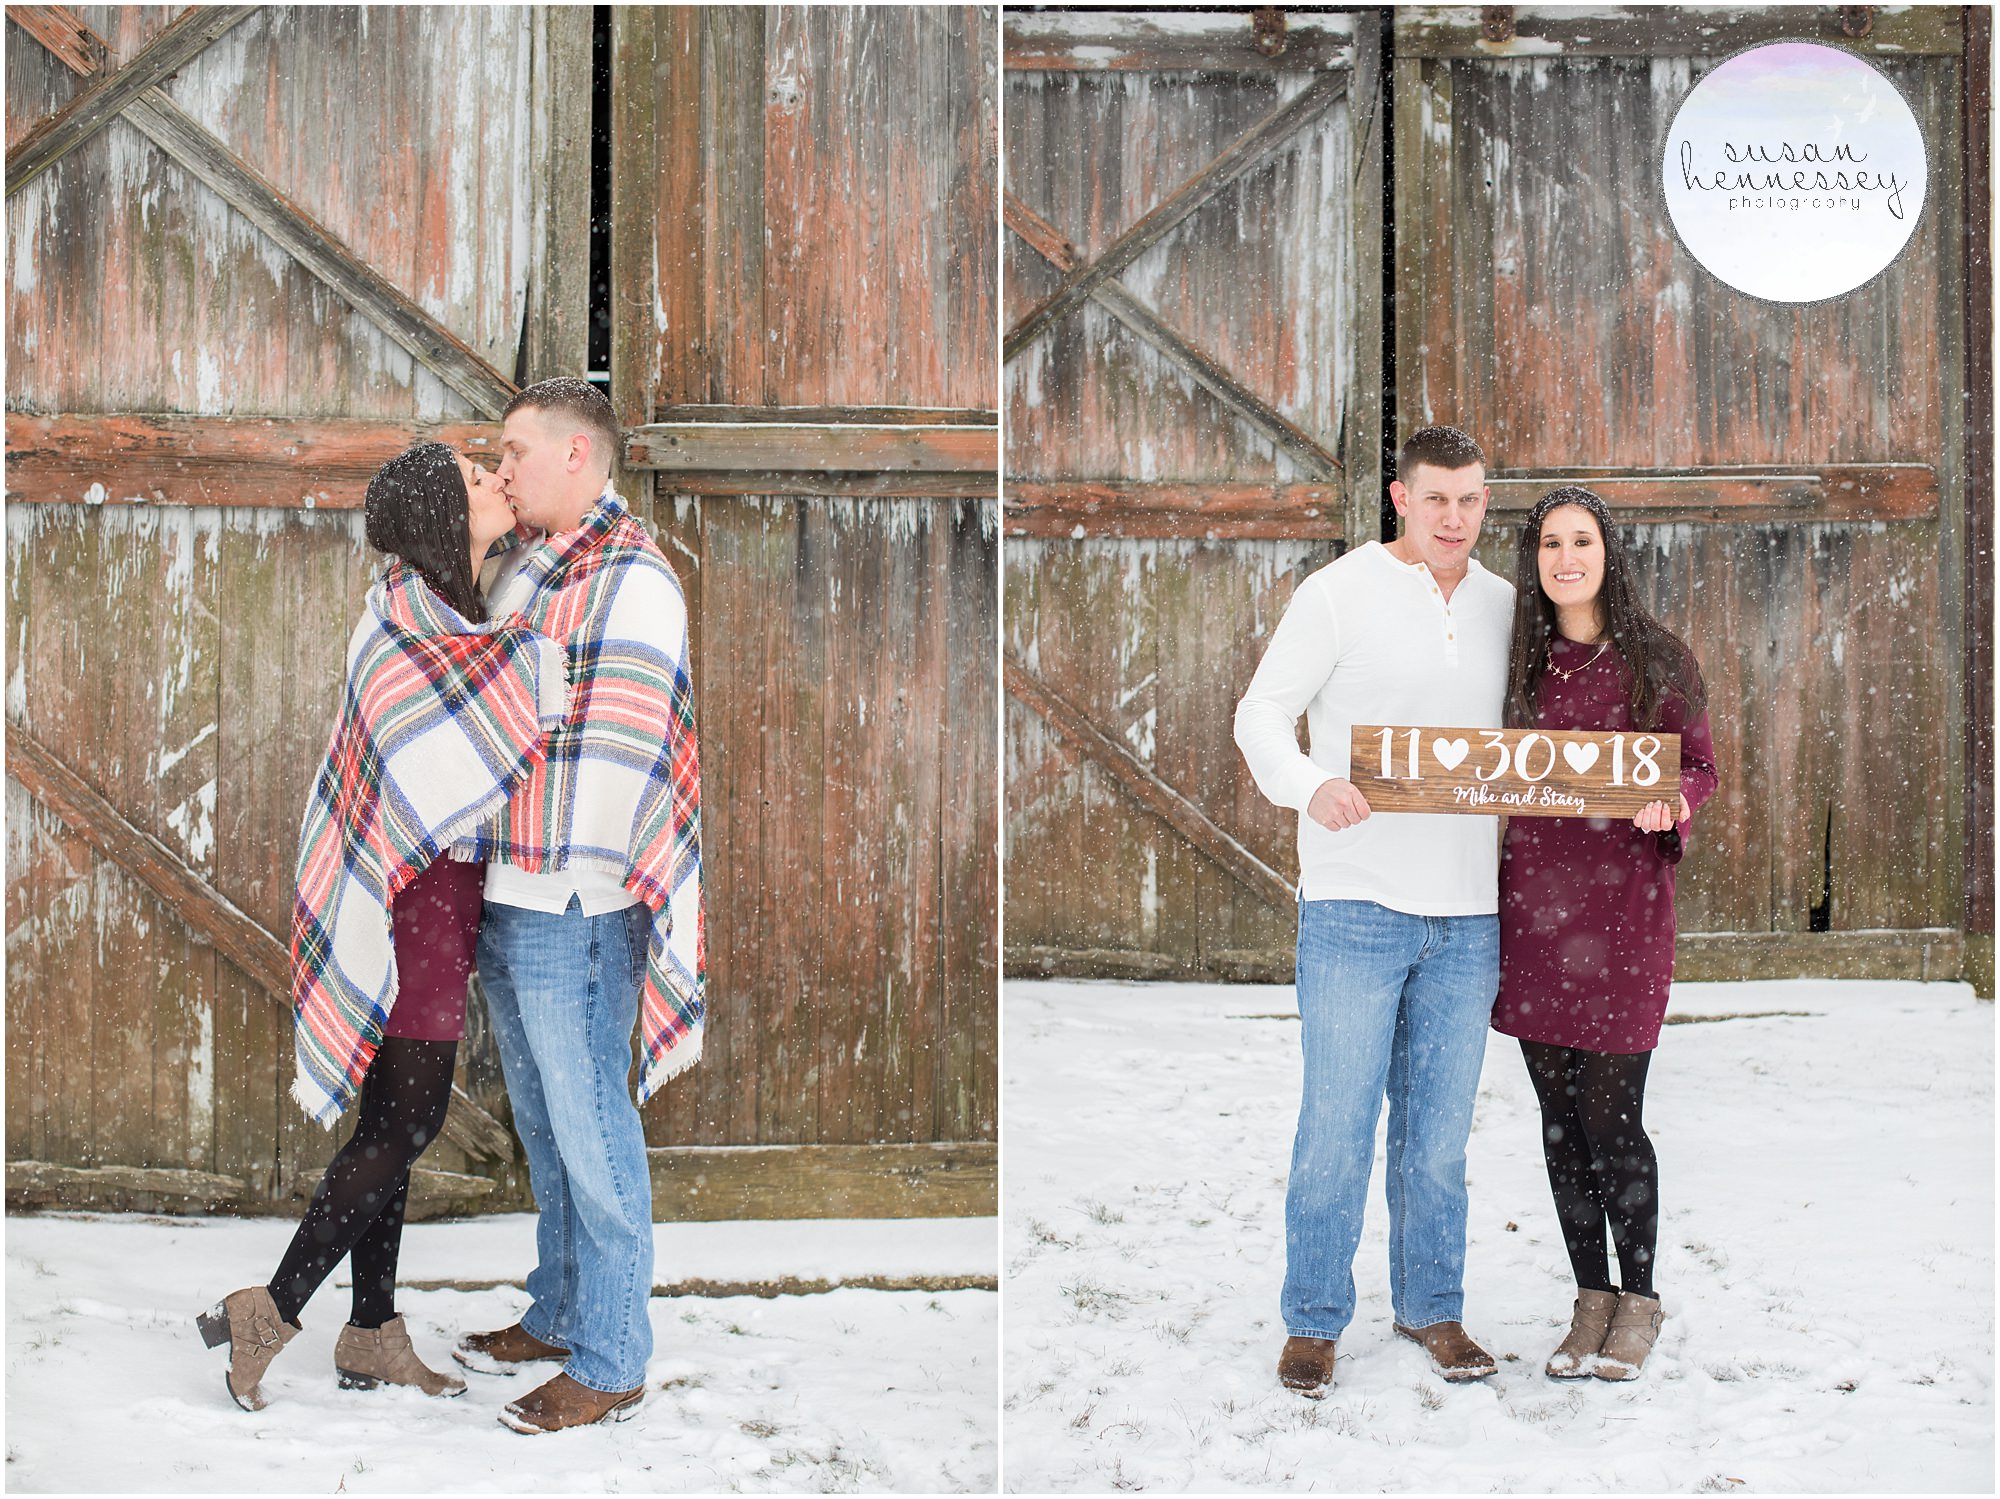 Stacy and Mike chose Laurita Winery as the back drop for their snowy Engagement Session